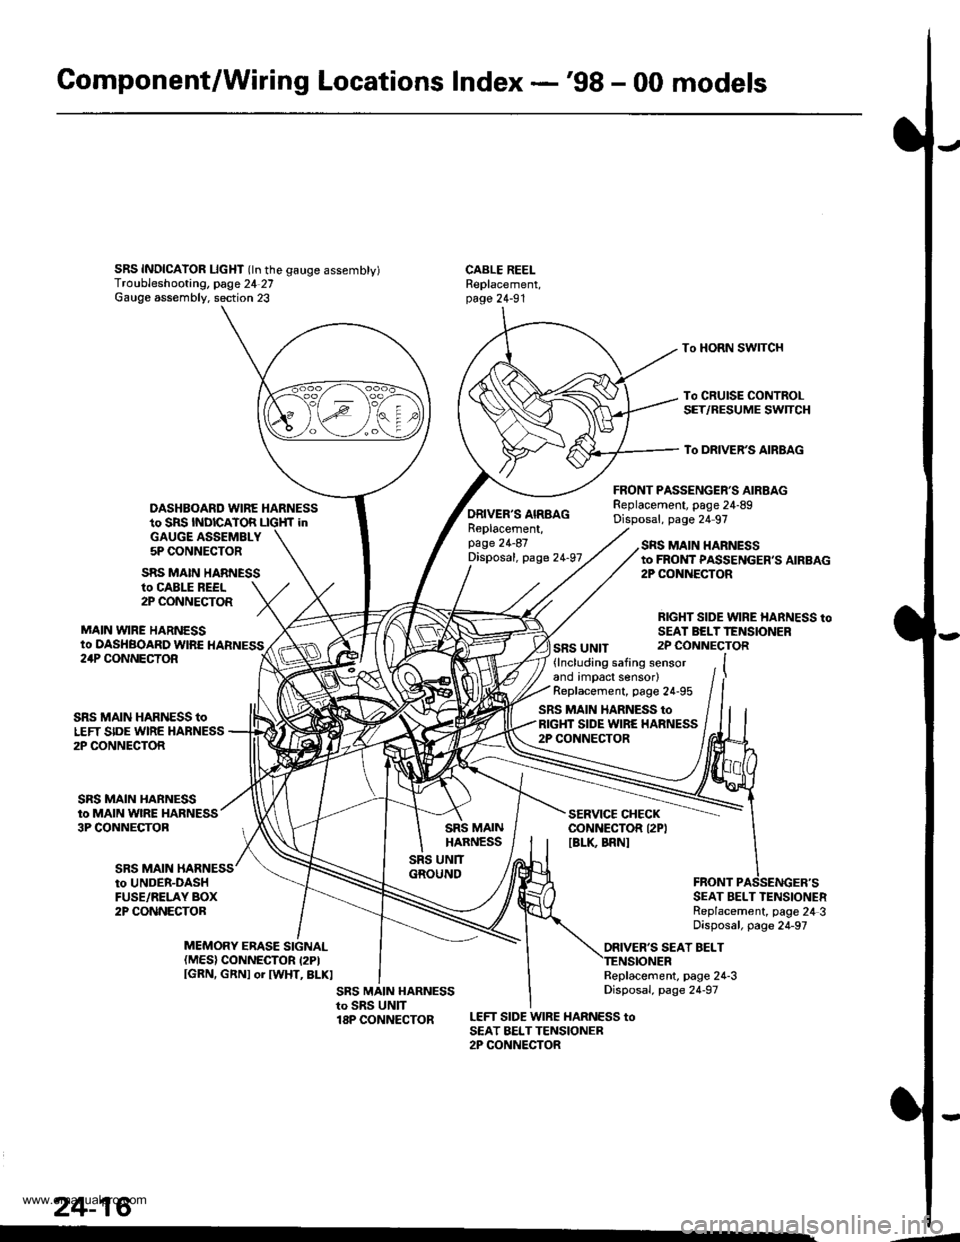 HONDA CR-V 2000 RD1-RD3 / 1.G User Guide 
Gomponent/Wiring Locations Index -98 - 00 models
SRS INDICAIOR LIcHT (ln the gauge assembty)Troubleshooting, page 24 27Gauge assembly. section 23
DASHBOARD WIRE HARNESSto SRS INDICATOR LIGHf inGAUGE